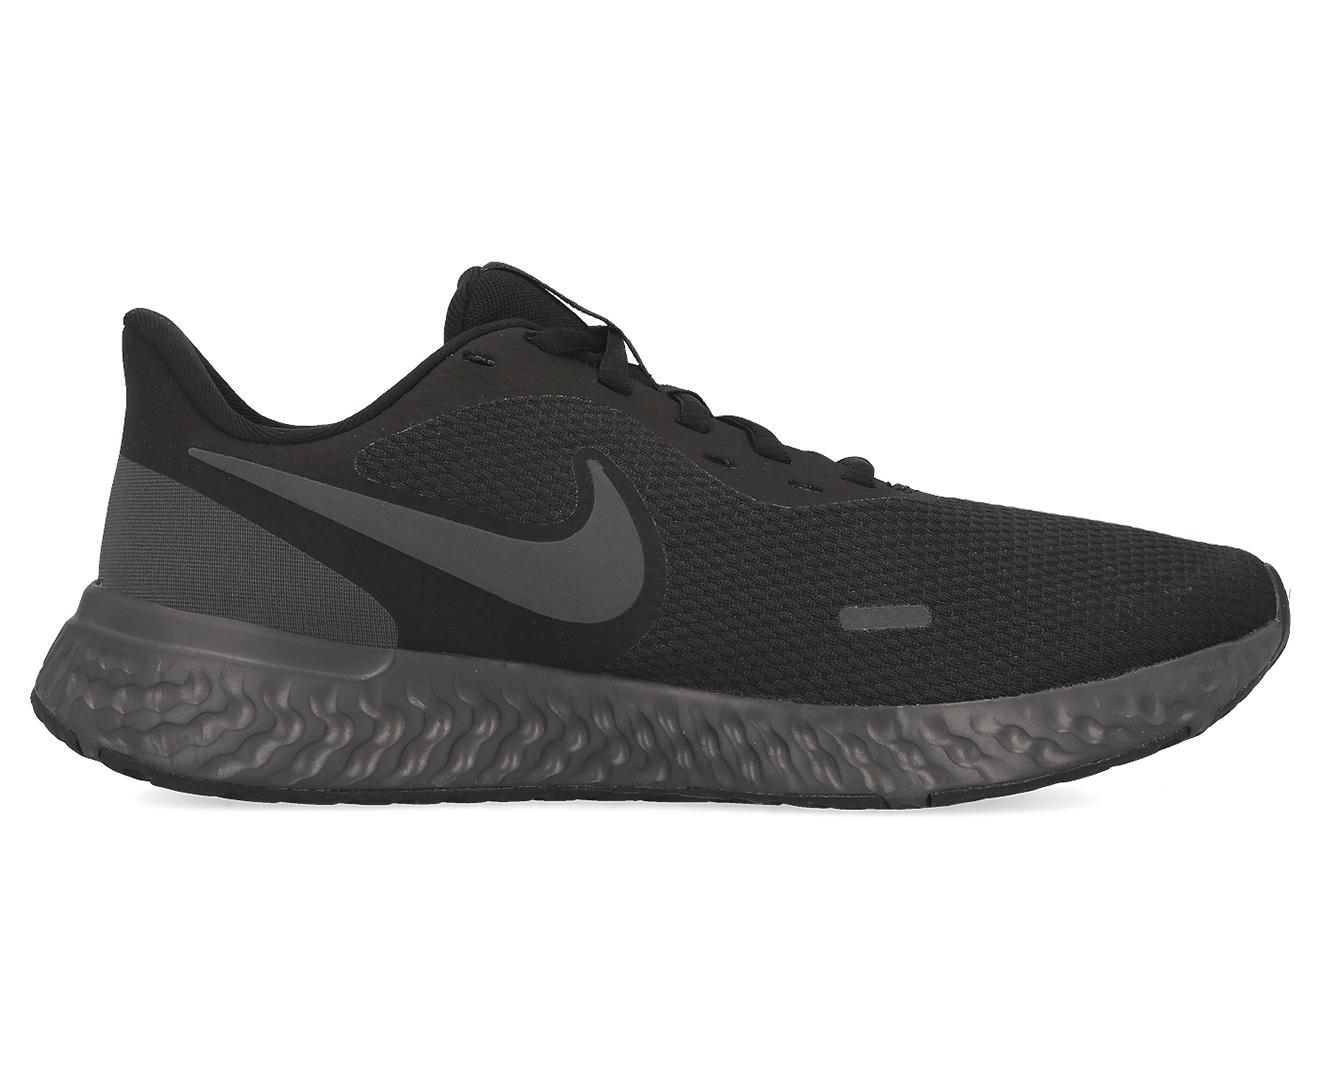 Nike Women's Revolution 5 Running Shoes - Black/Anthracite | Catch.co.nz